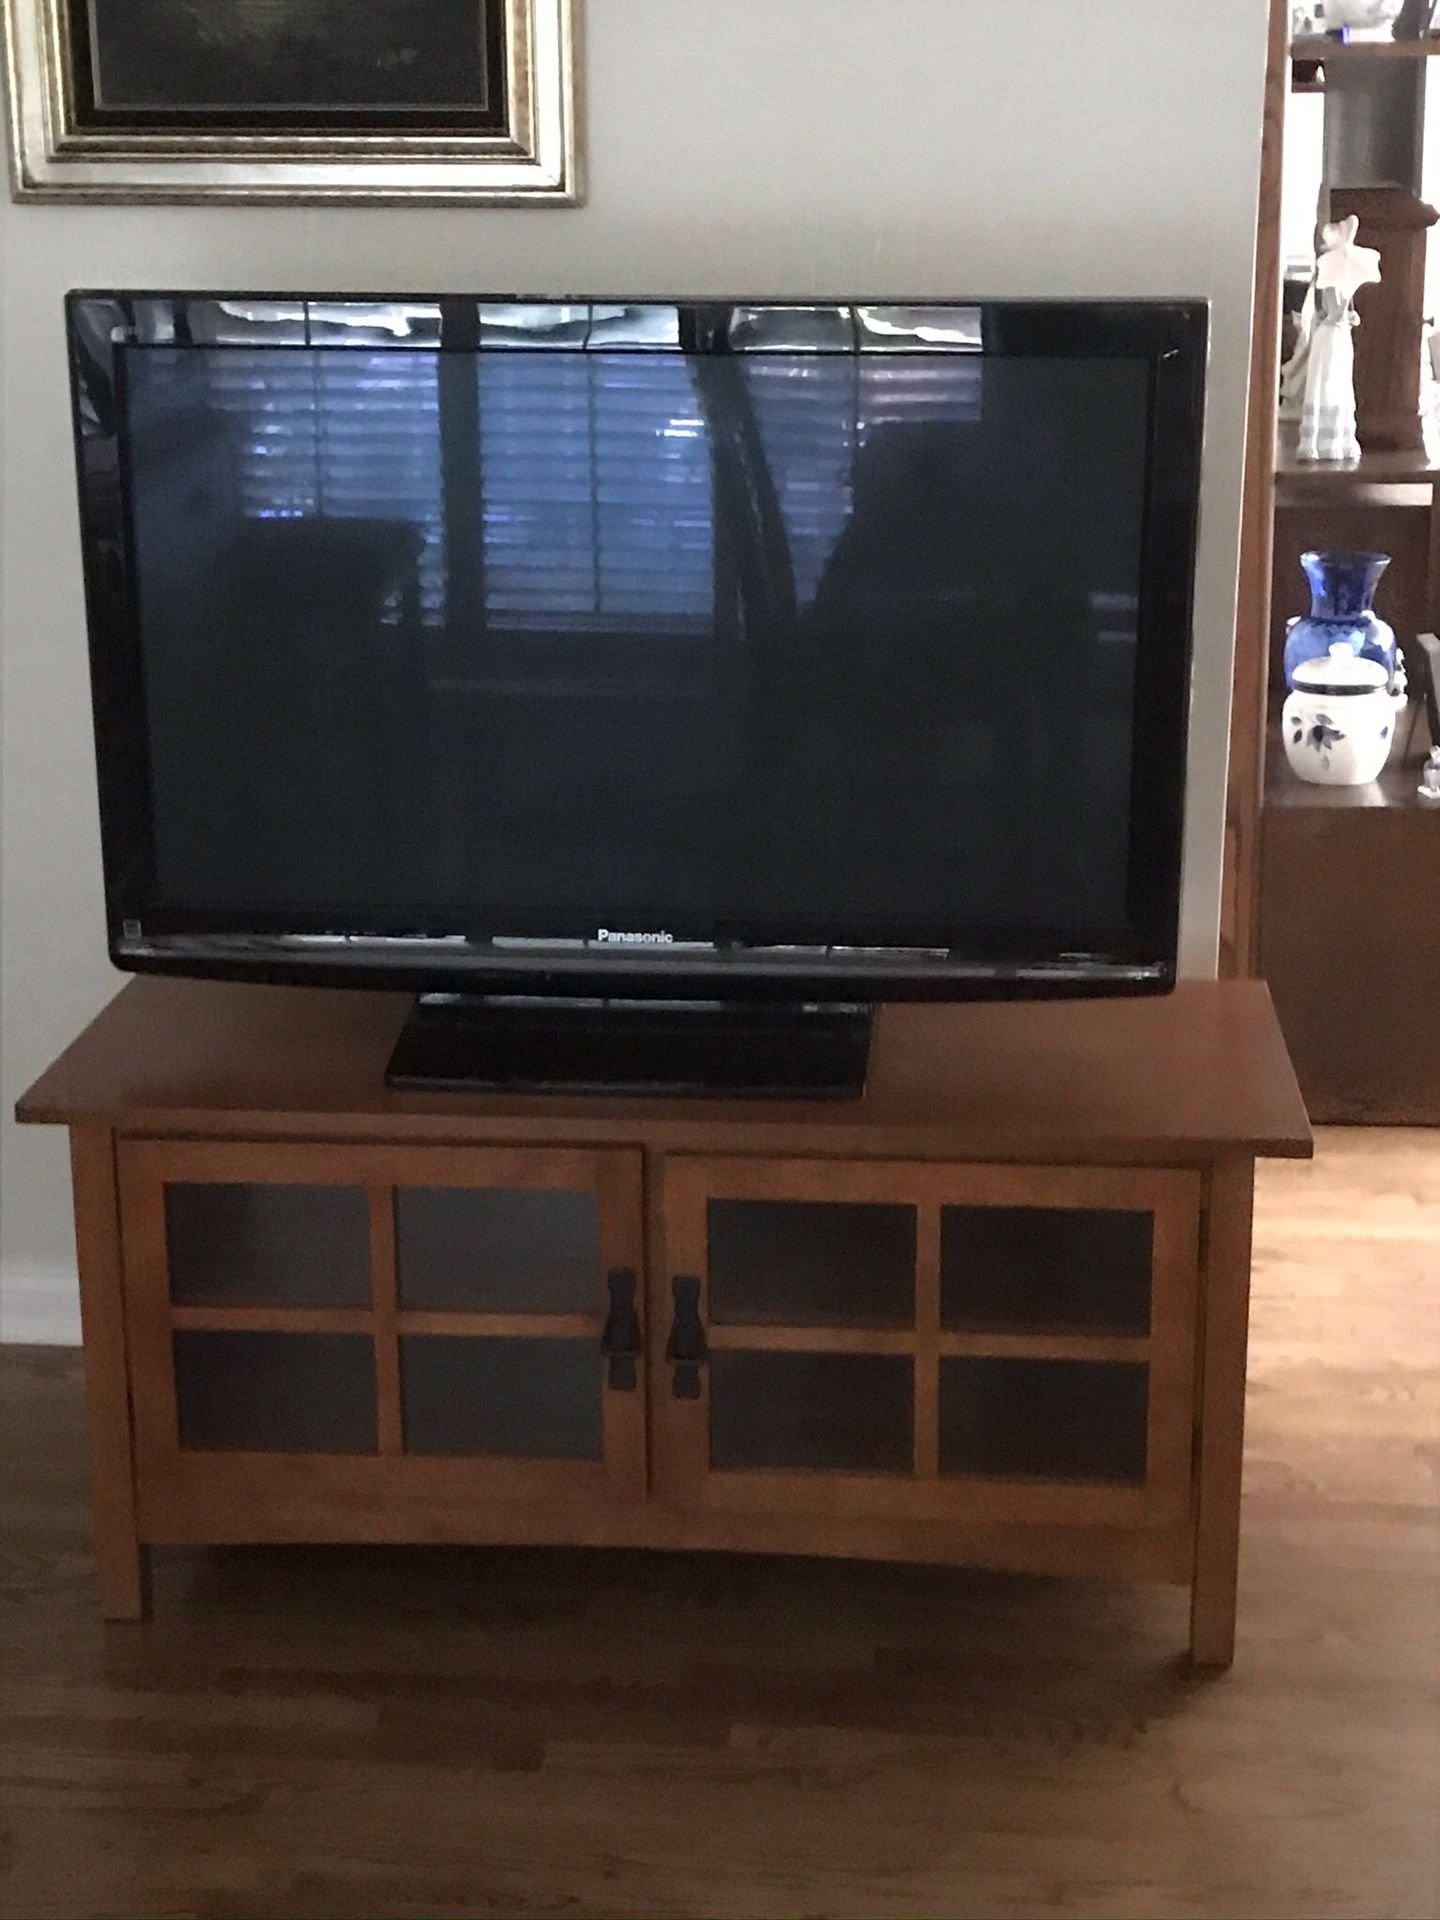 42” Panasonic TV plus stand - asking $115.00 for both